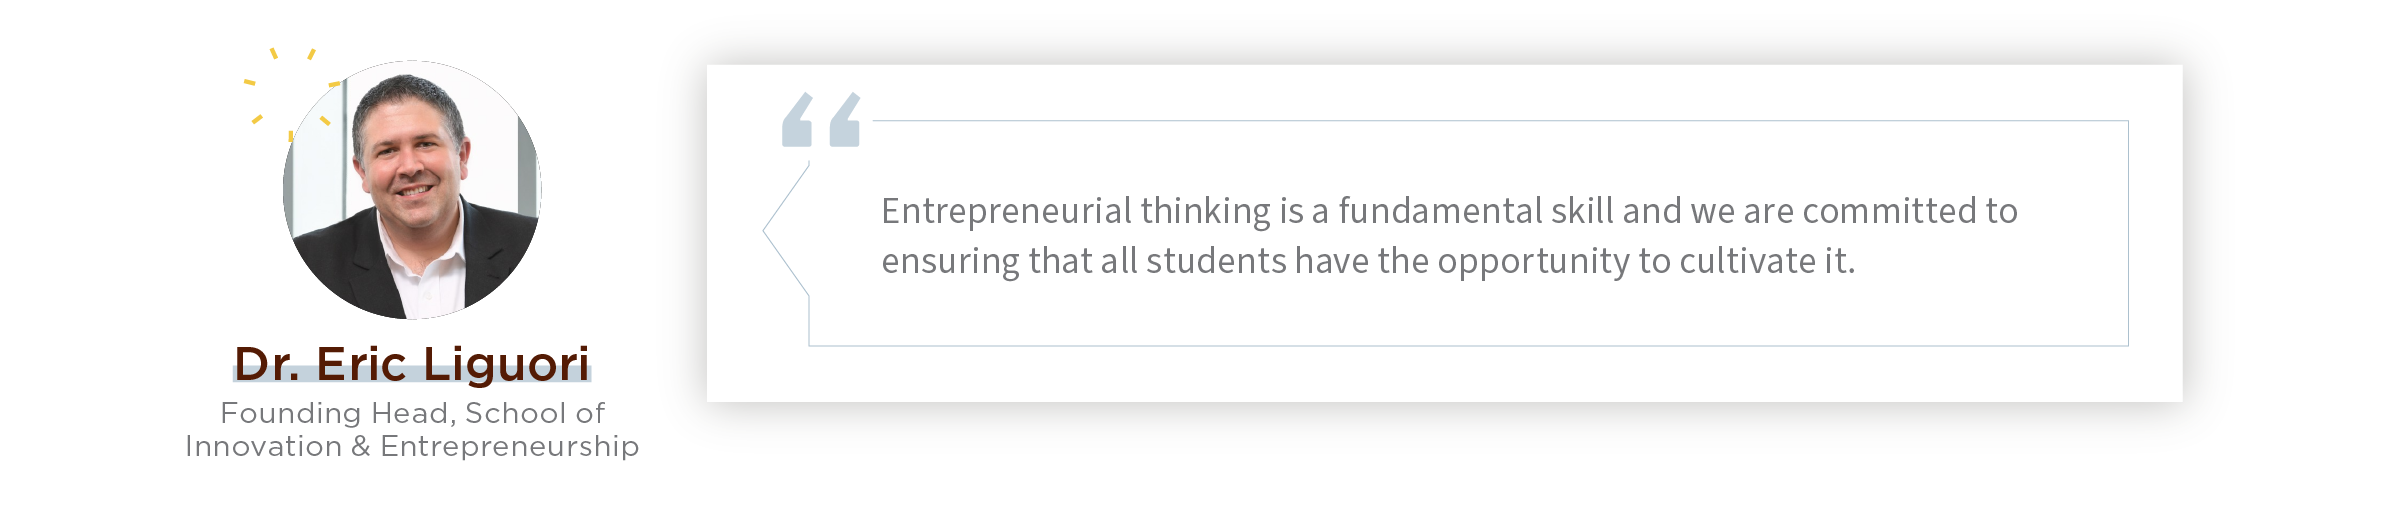 Quote: "Entrepreneurial thinking is a fundamental skill and we are committed to ensuring that all students have the opportunity to cultivate it.” - Eric Liguori